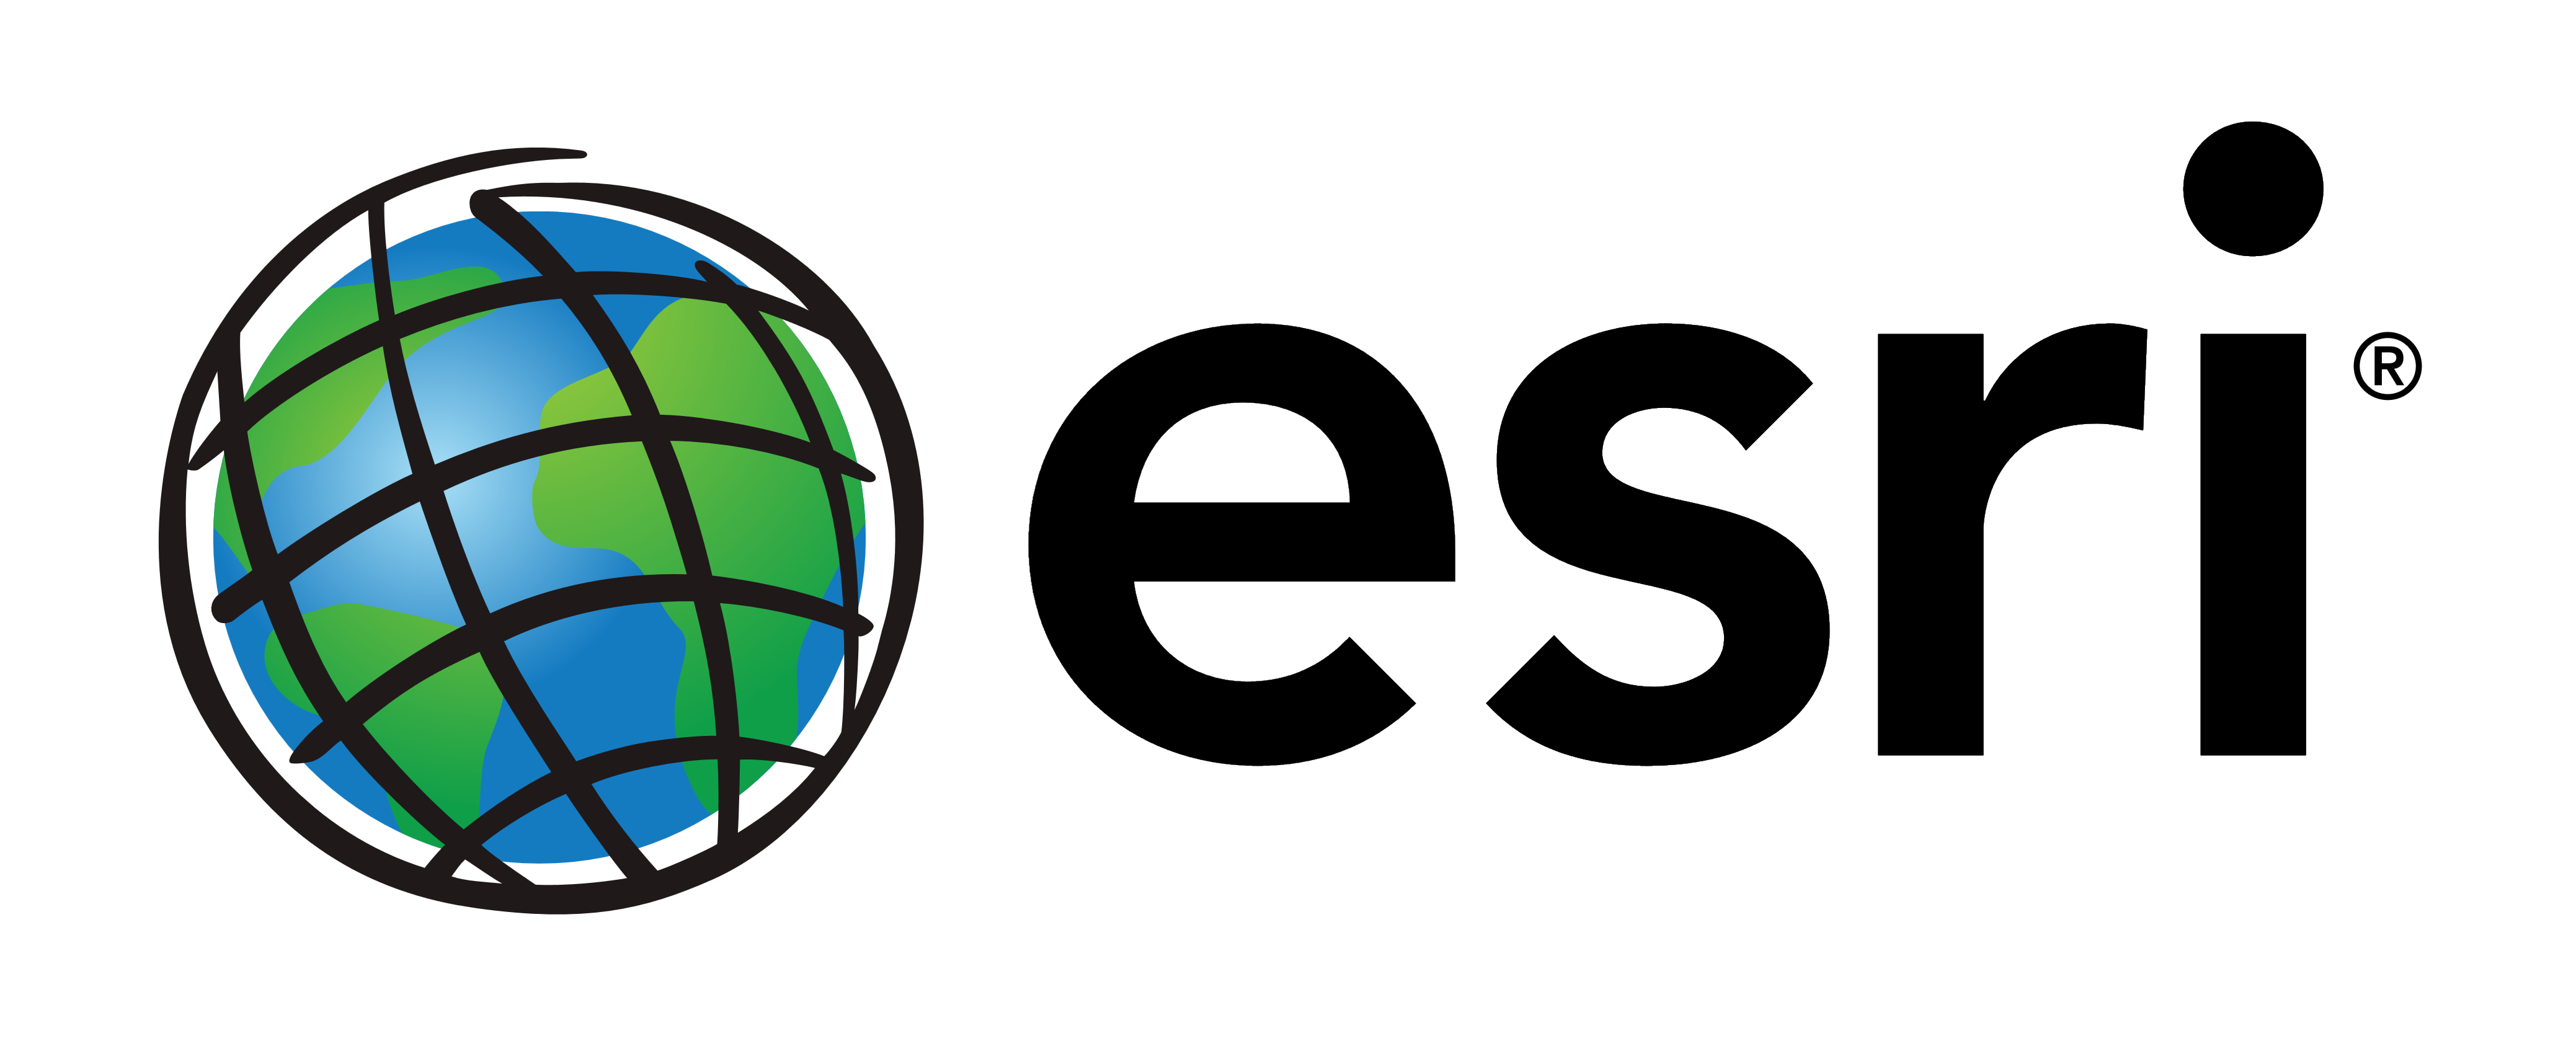 Graphic logo with an icon of the globe and text that says esri